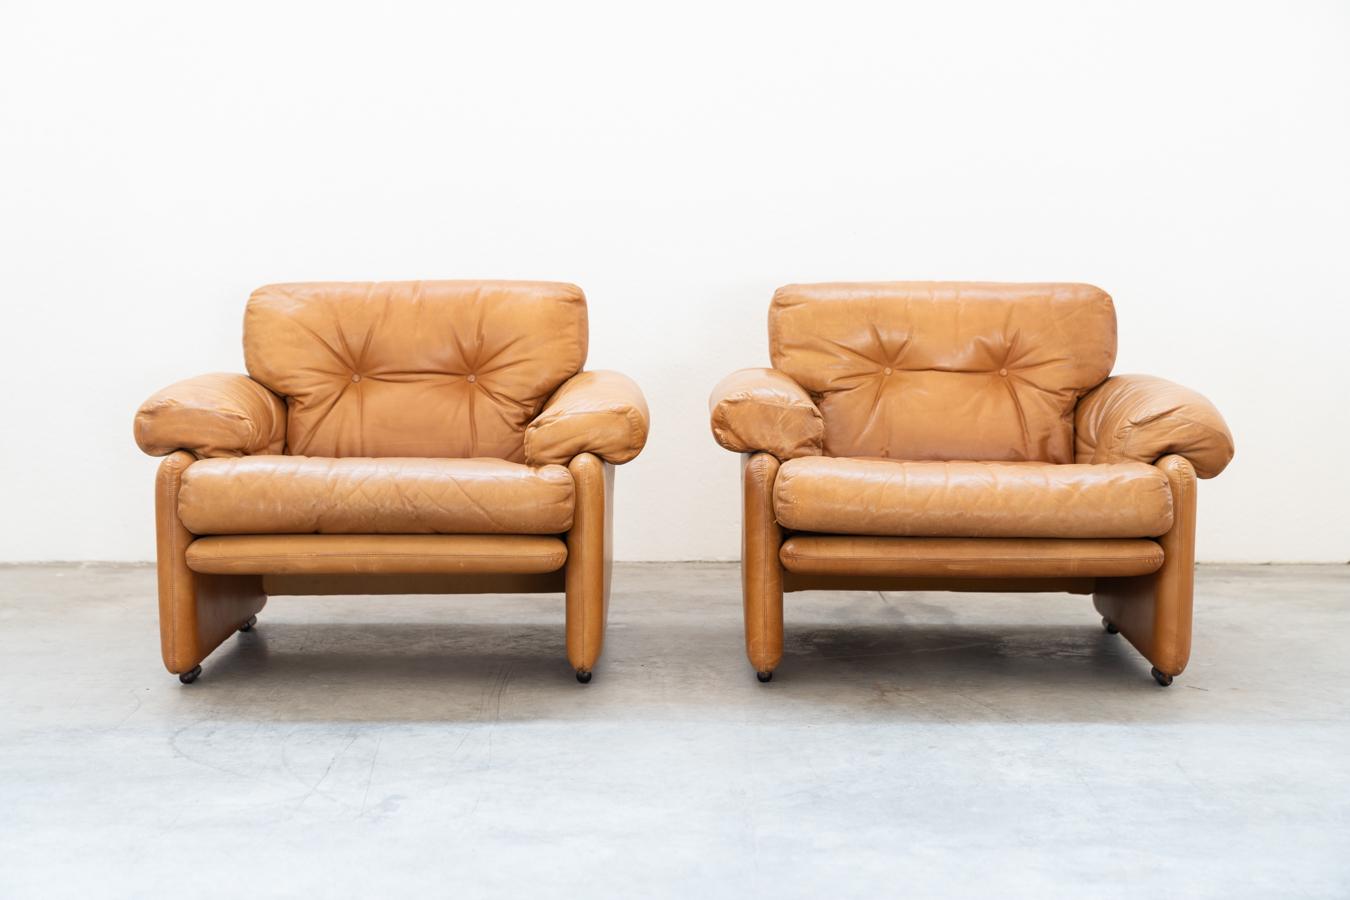 Pair of armchairs with cognac-colored pouf model 